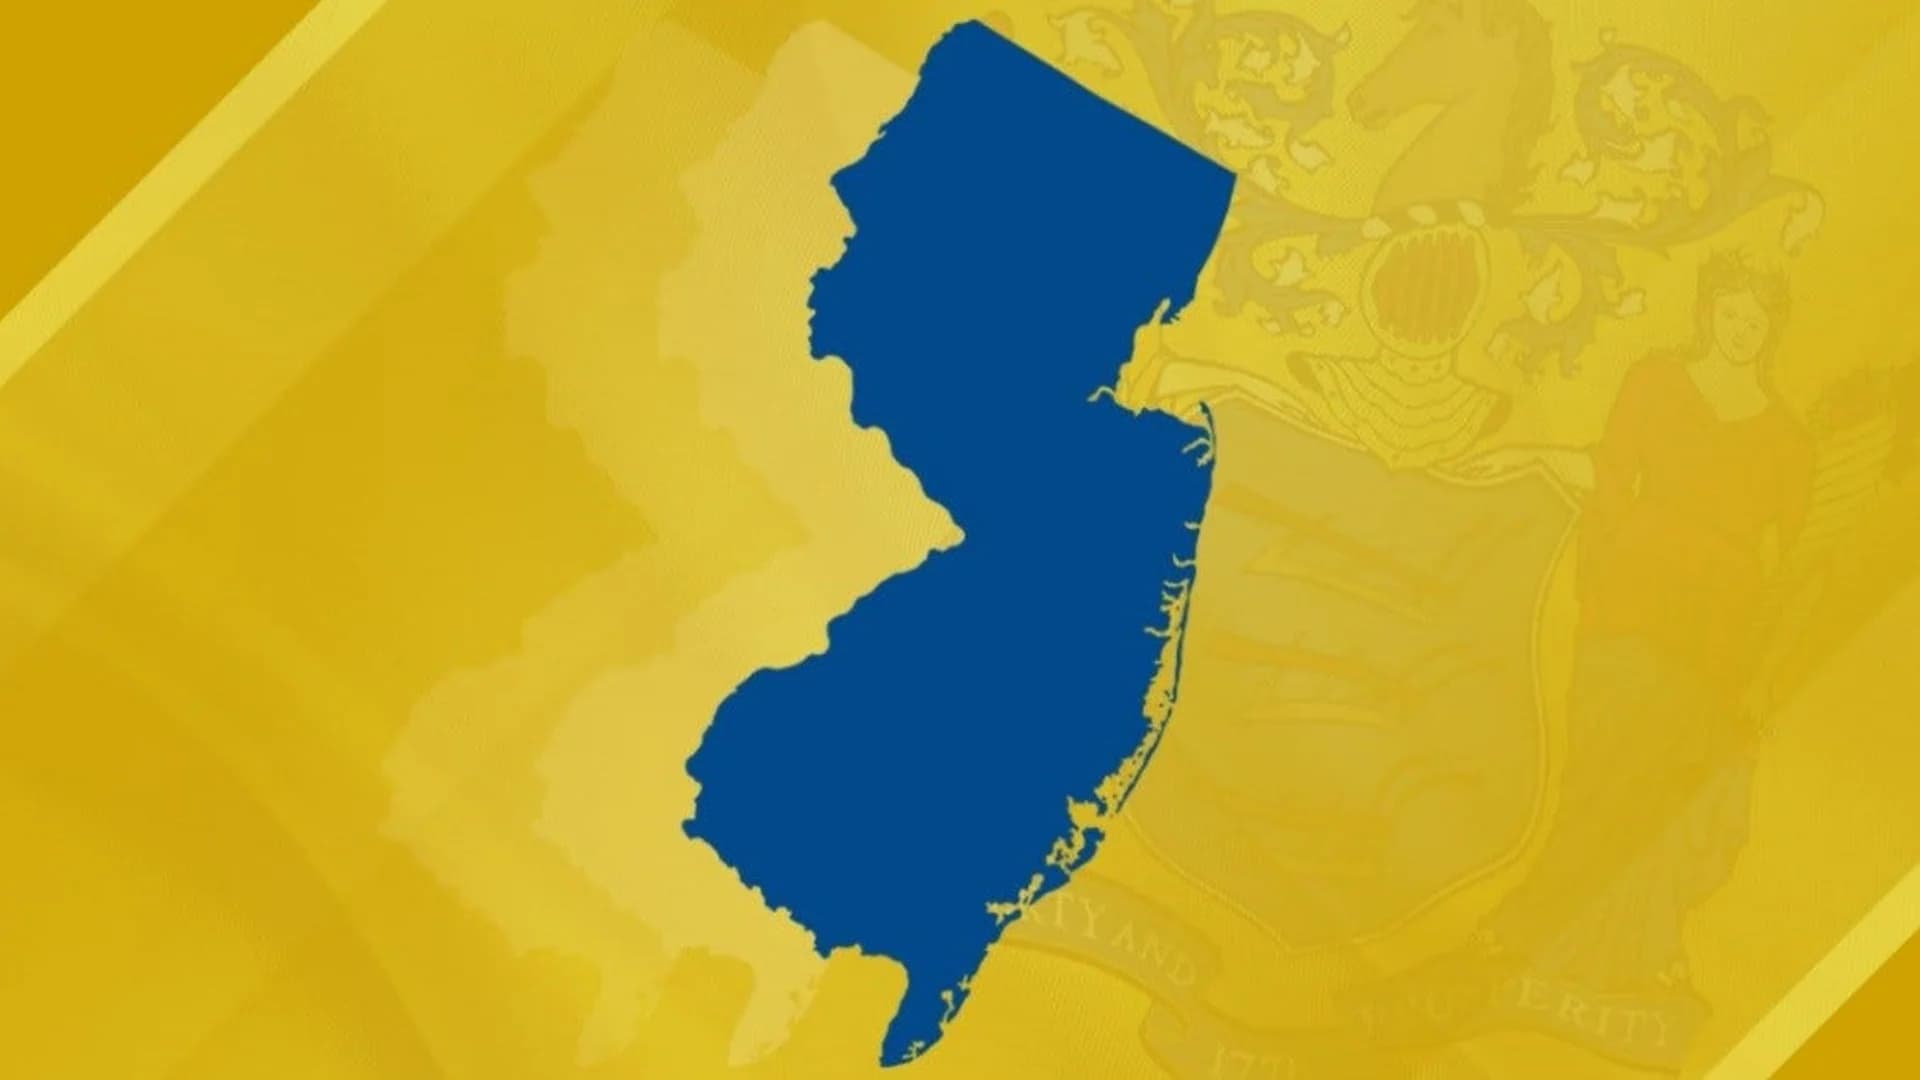 Poll: 6 in 10 New Jerseyans enjoy quality of life in state